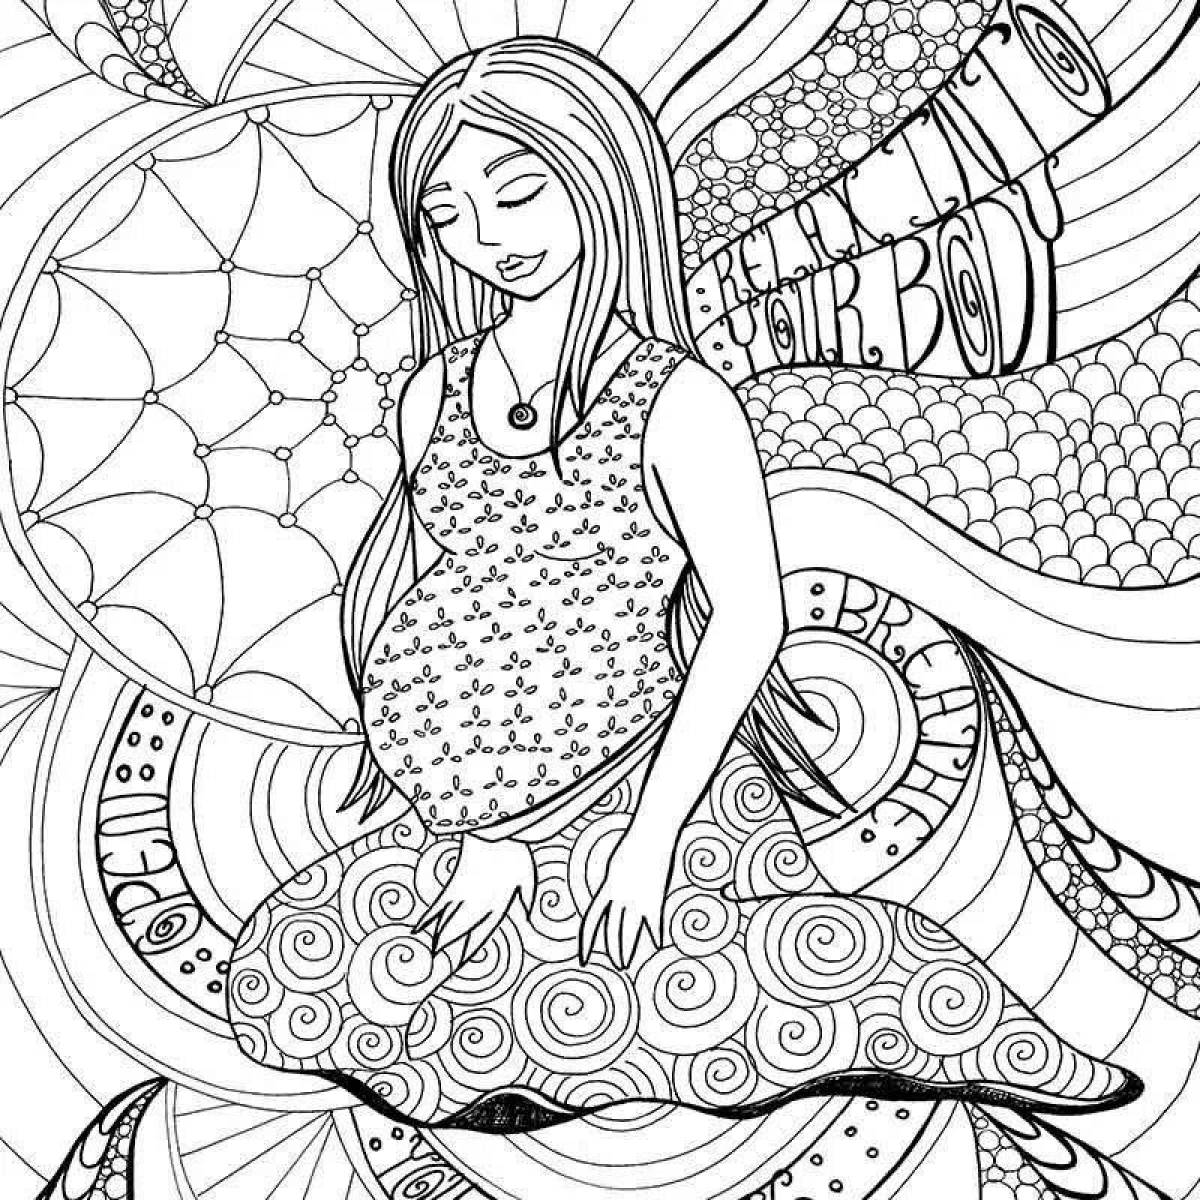 Comforting coloring for pregnant women antistress